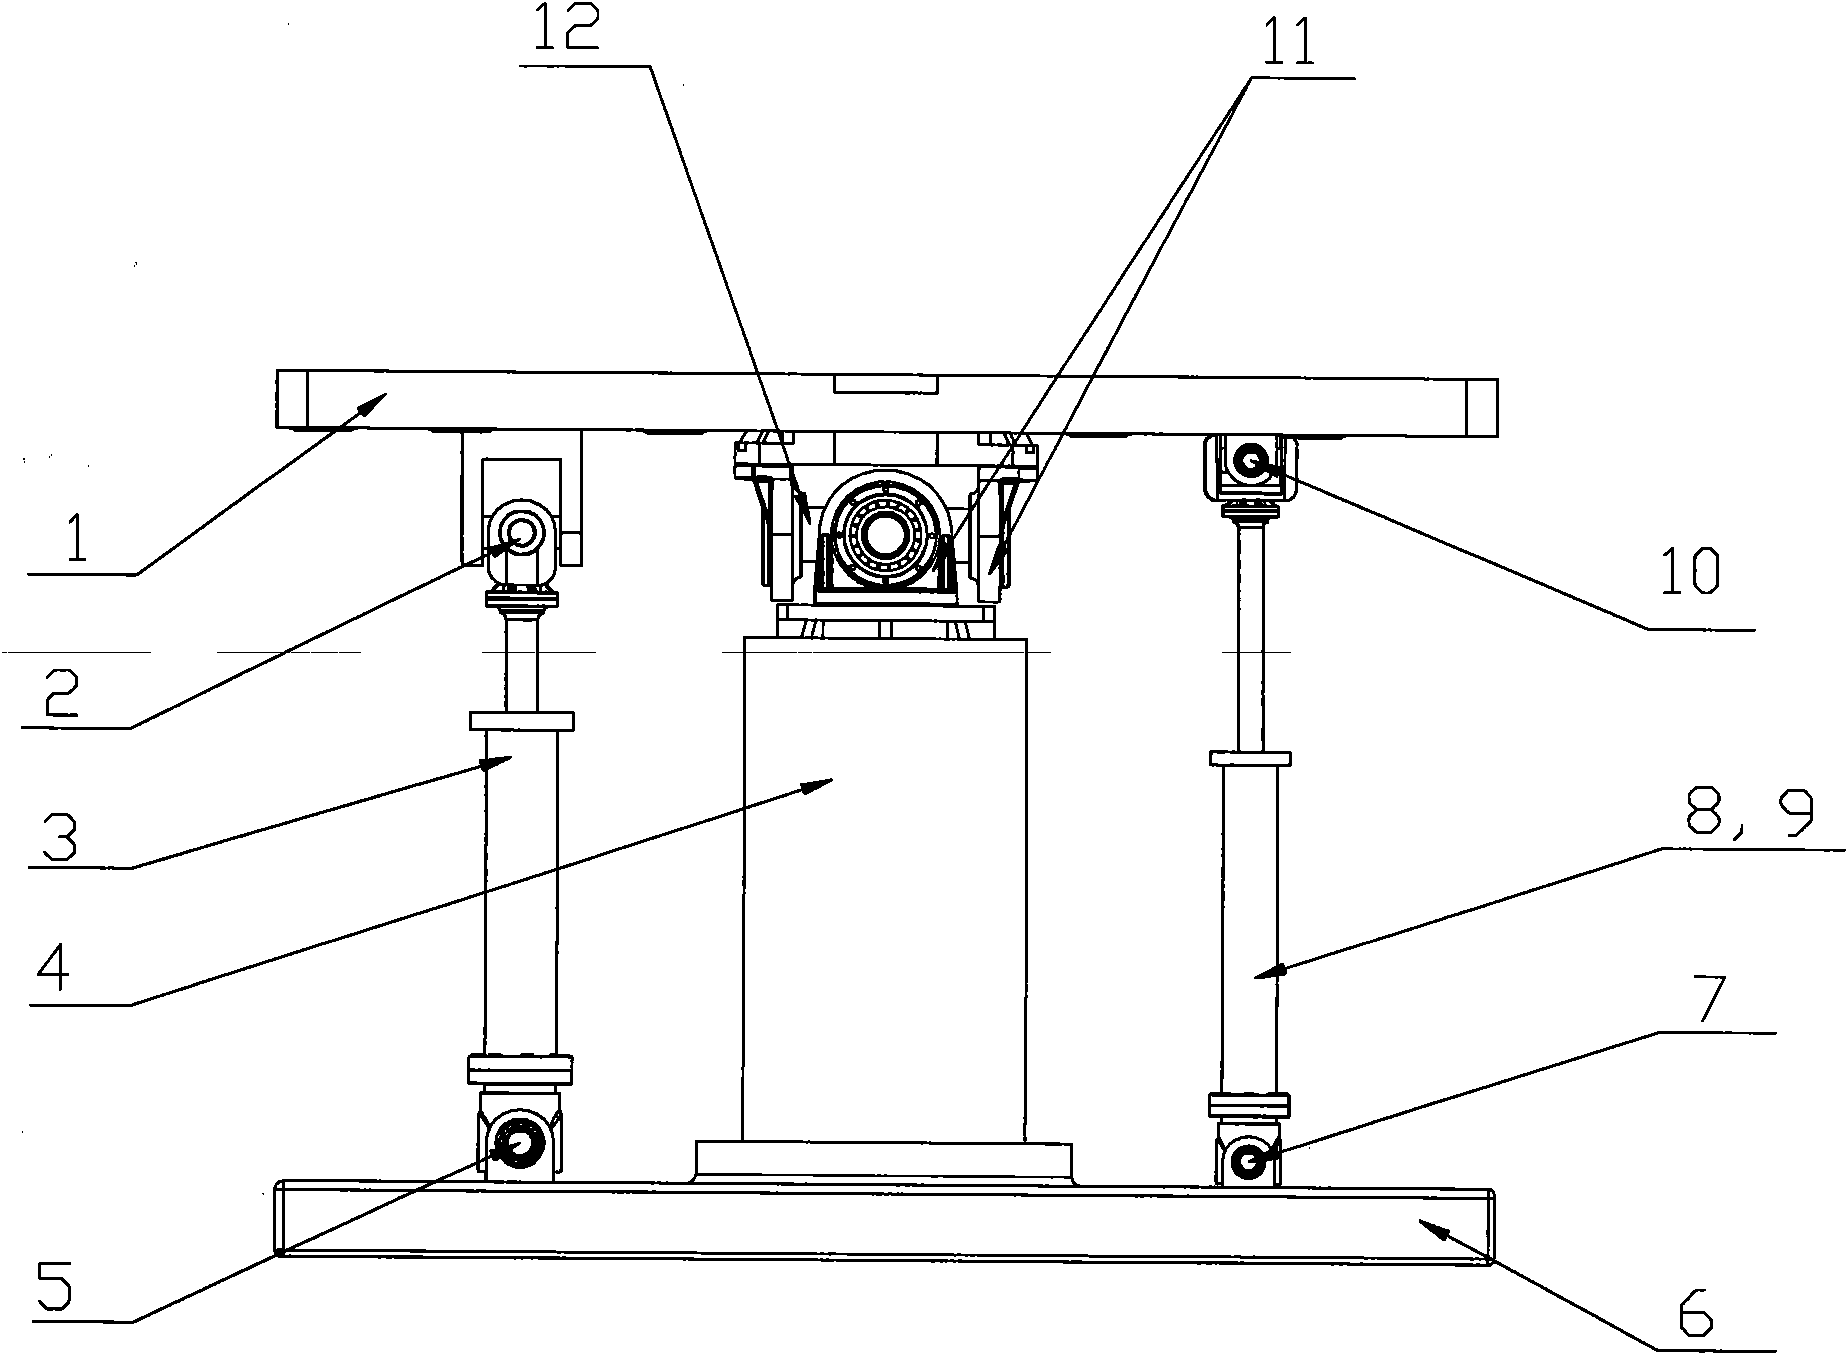 Spatial redundant drive swinging experiment table with two degrees of freedom